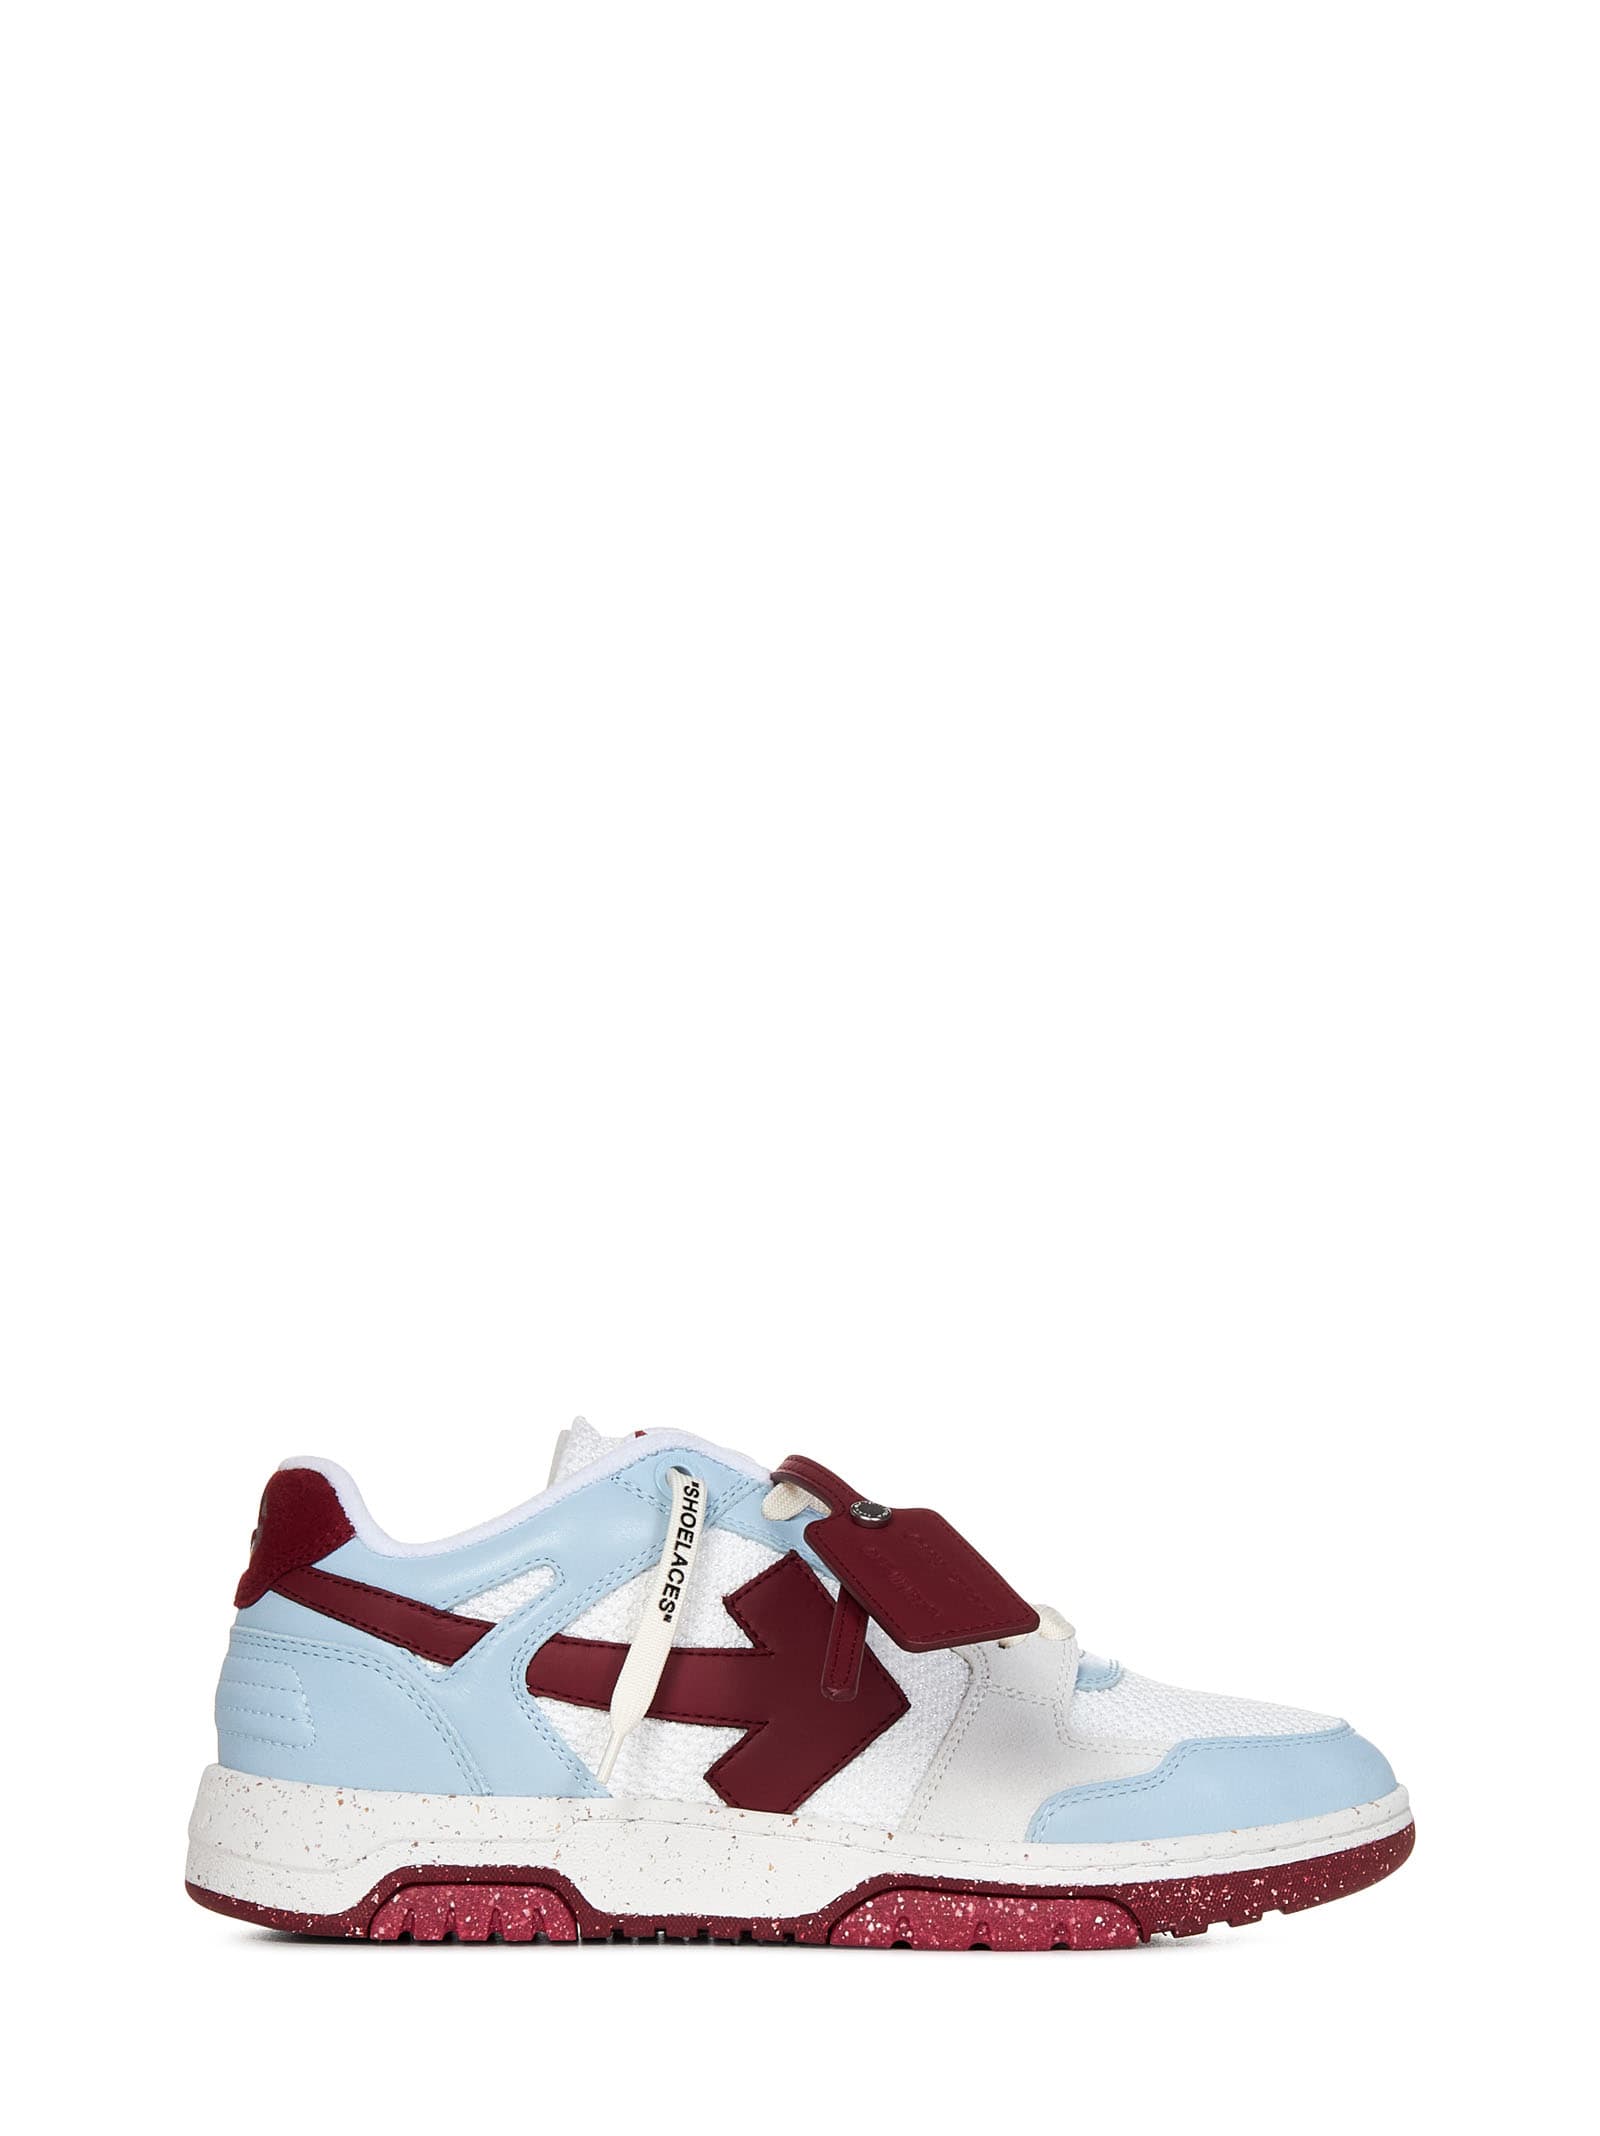 OFF-WHITE OUT OF OFFICE SLIM SNEAKERS